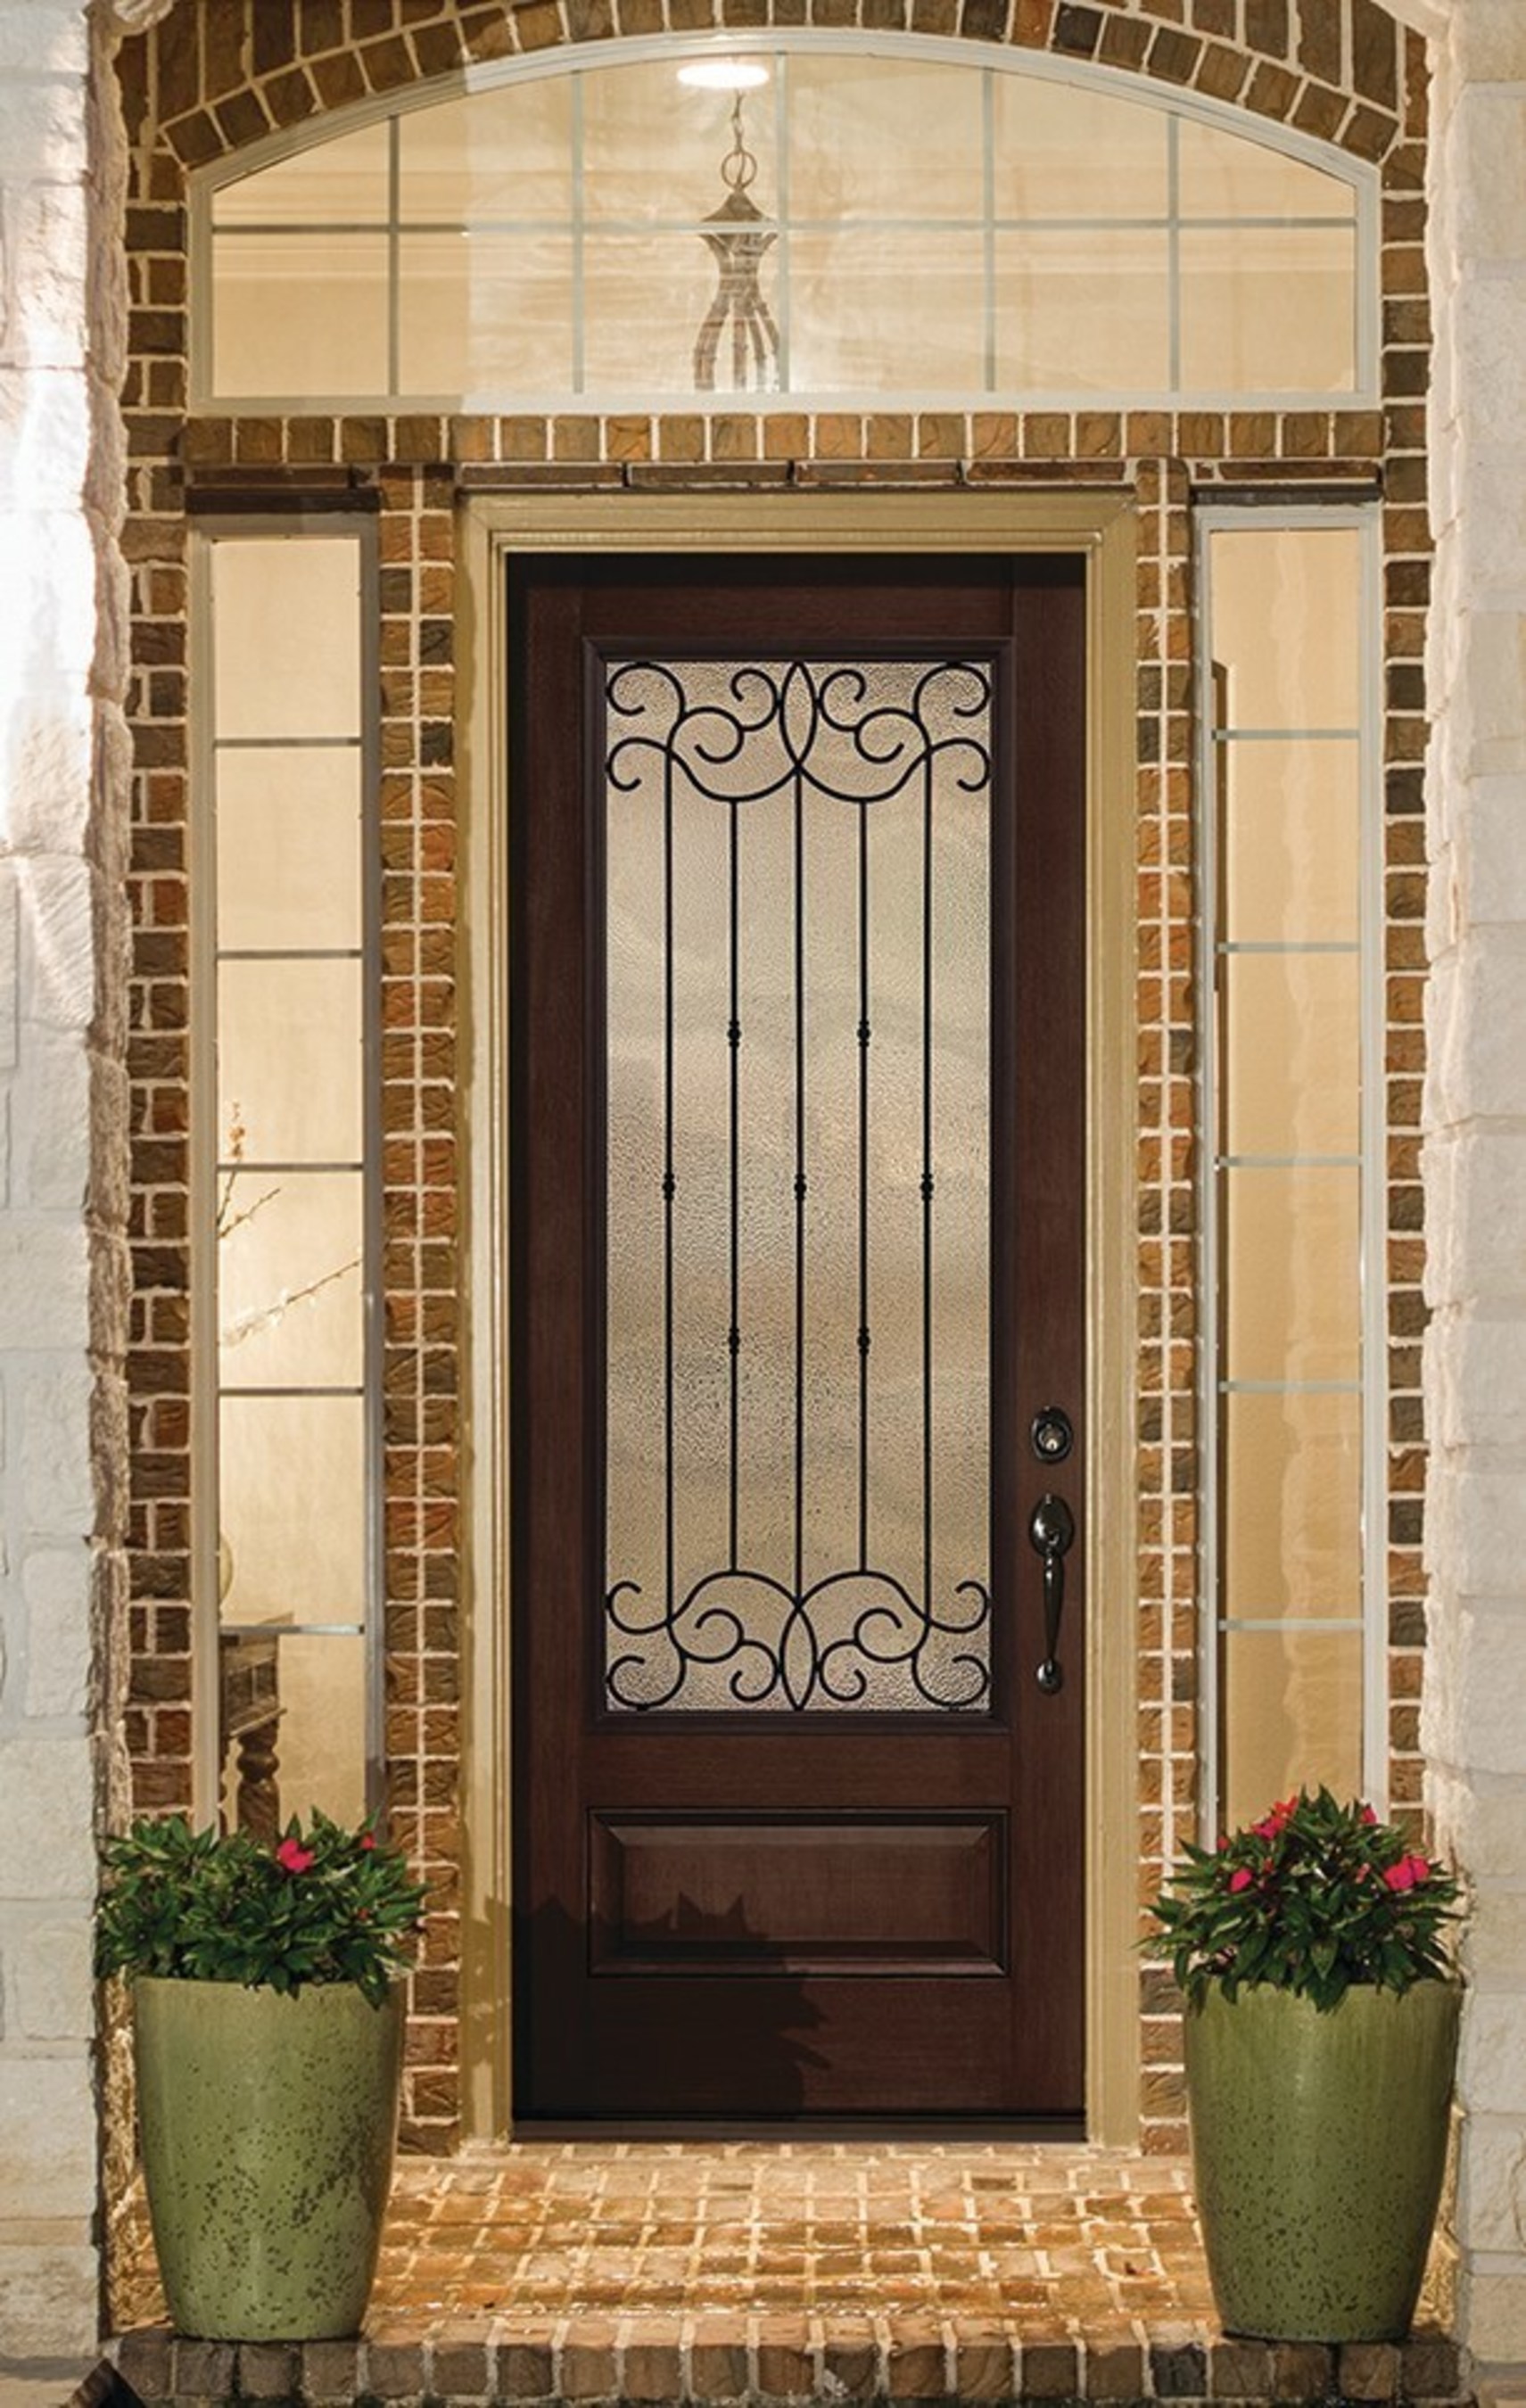 This Therma-Tru Classic-Craft Mahogany Collection door features Borrassa glass package and has just been designated as a Consumers Digest "Best Buy" for fiberglass entryways.